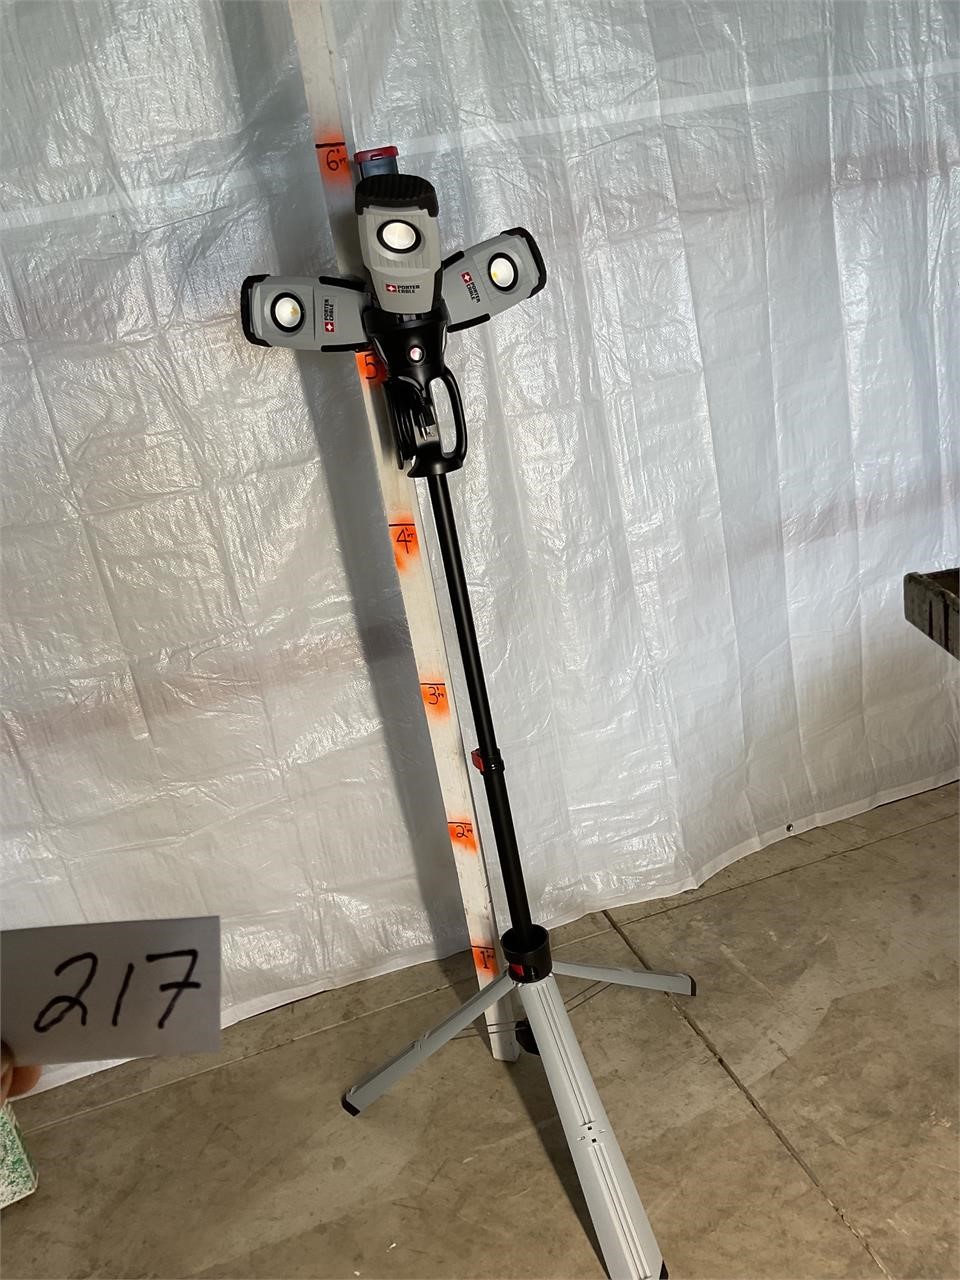 Porter Cable work light on tripod stand